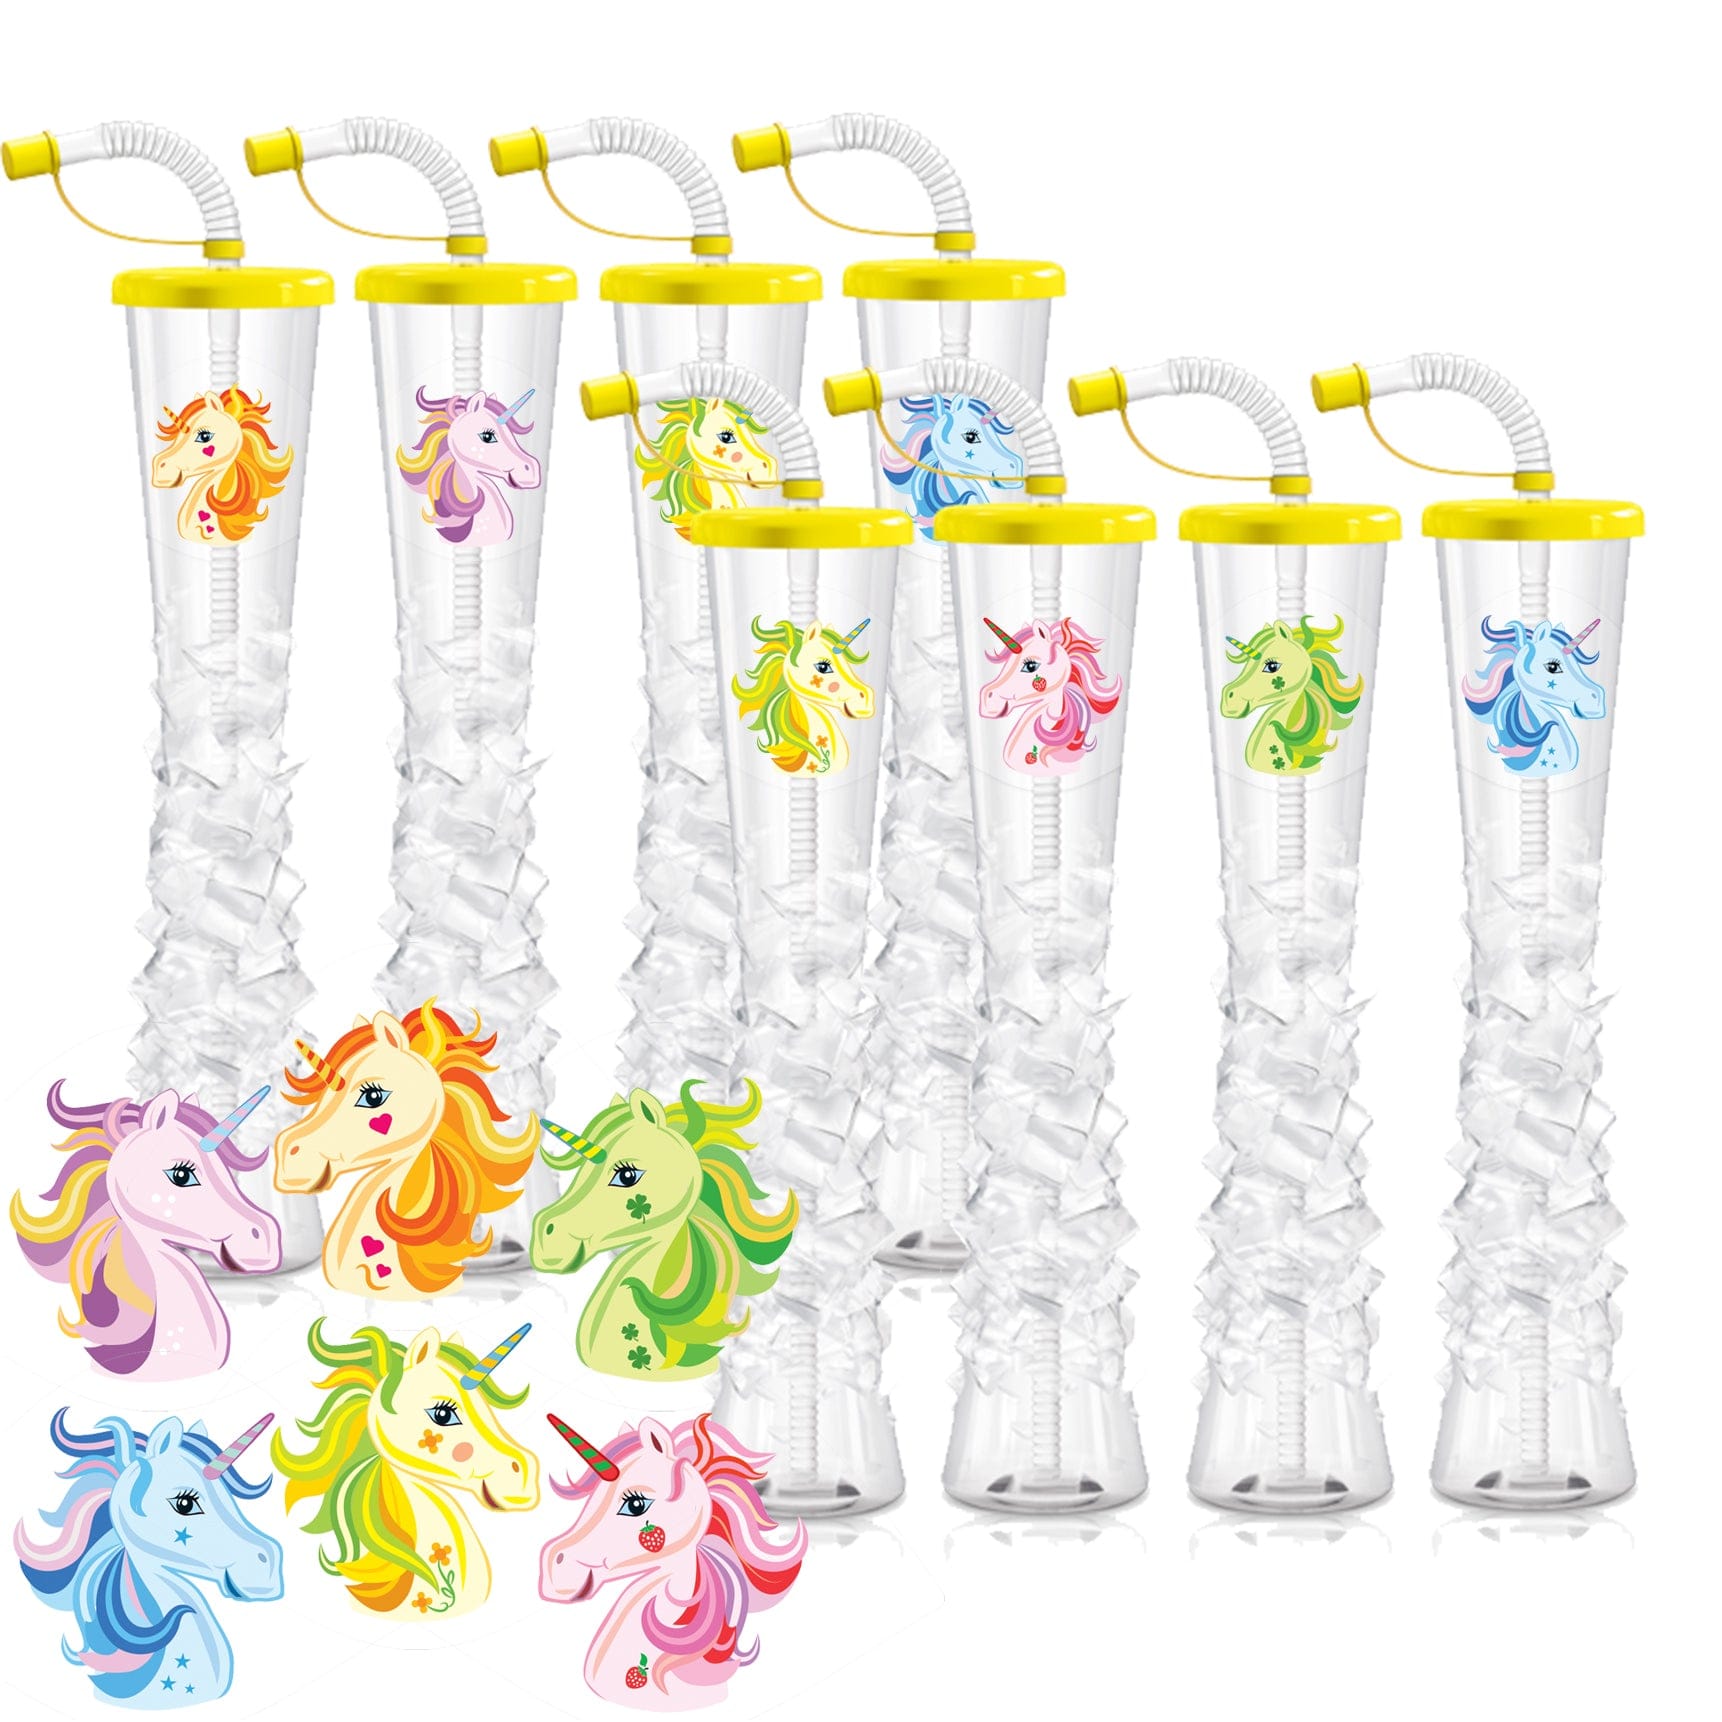 Sweet World USA Yard Cups Yellow with Unicorn Unicorn Ice Yard Cups (54 Cups) - for Margaritas and Frozen Drinks, Kids Parties - 17oz. (500ml) cups with lids and straws